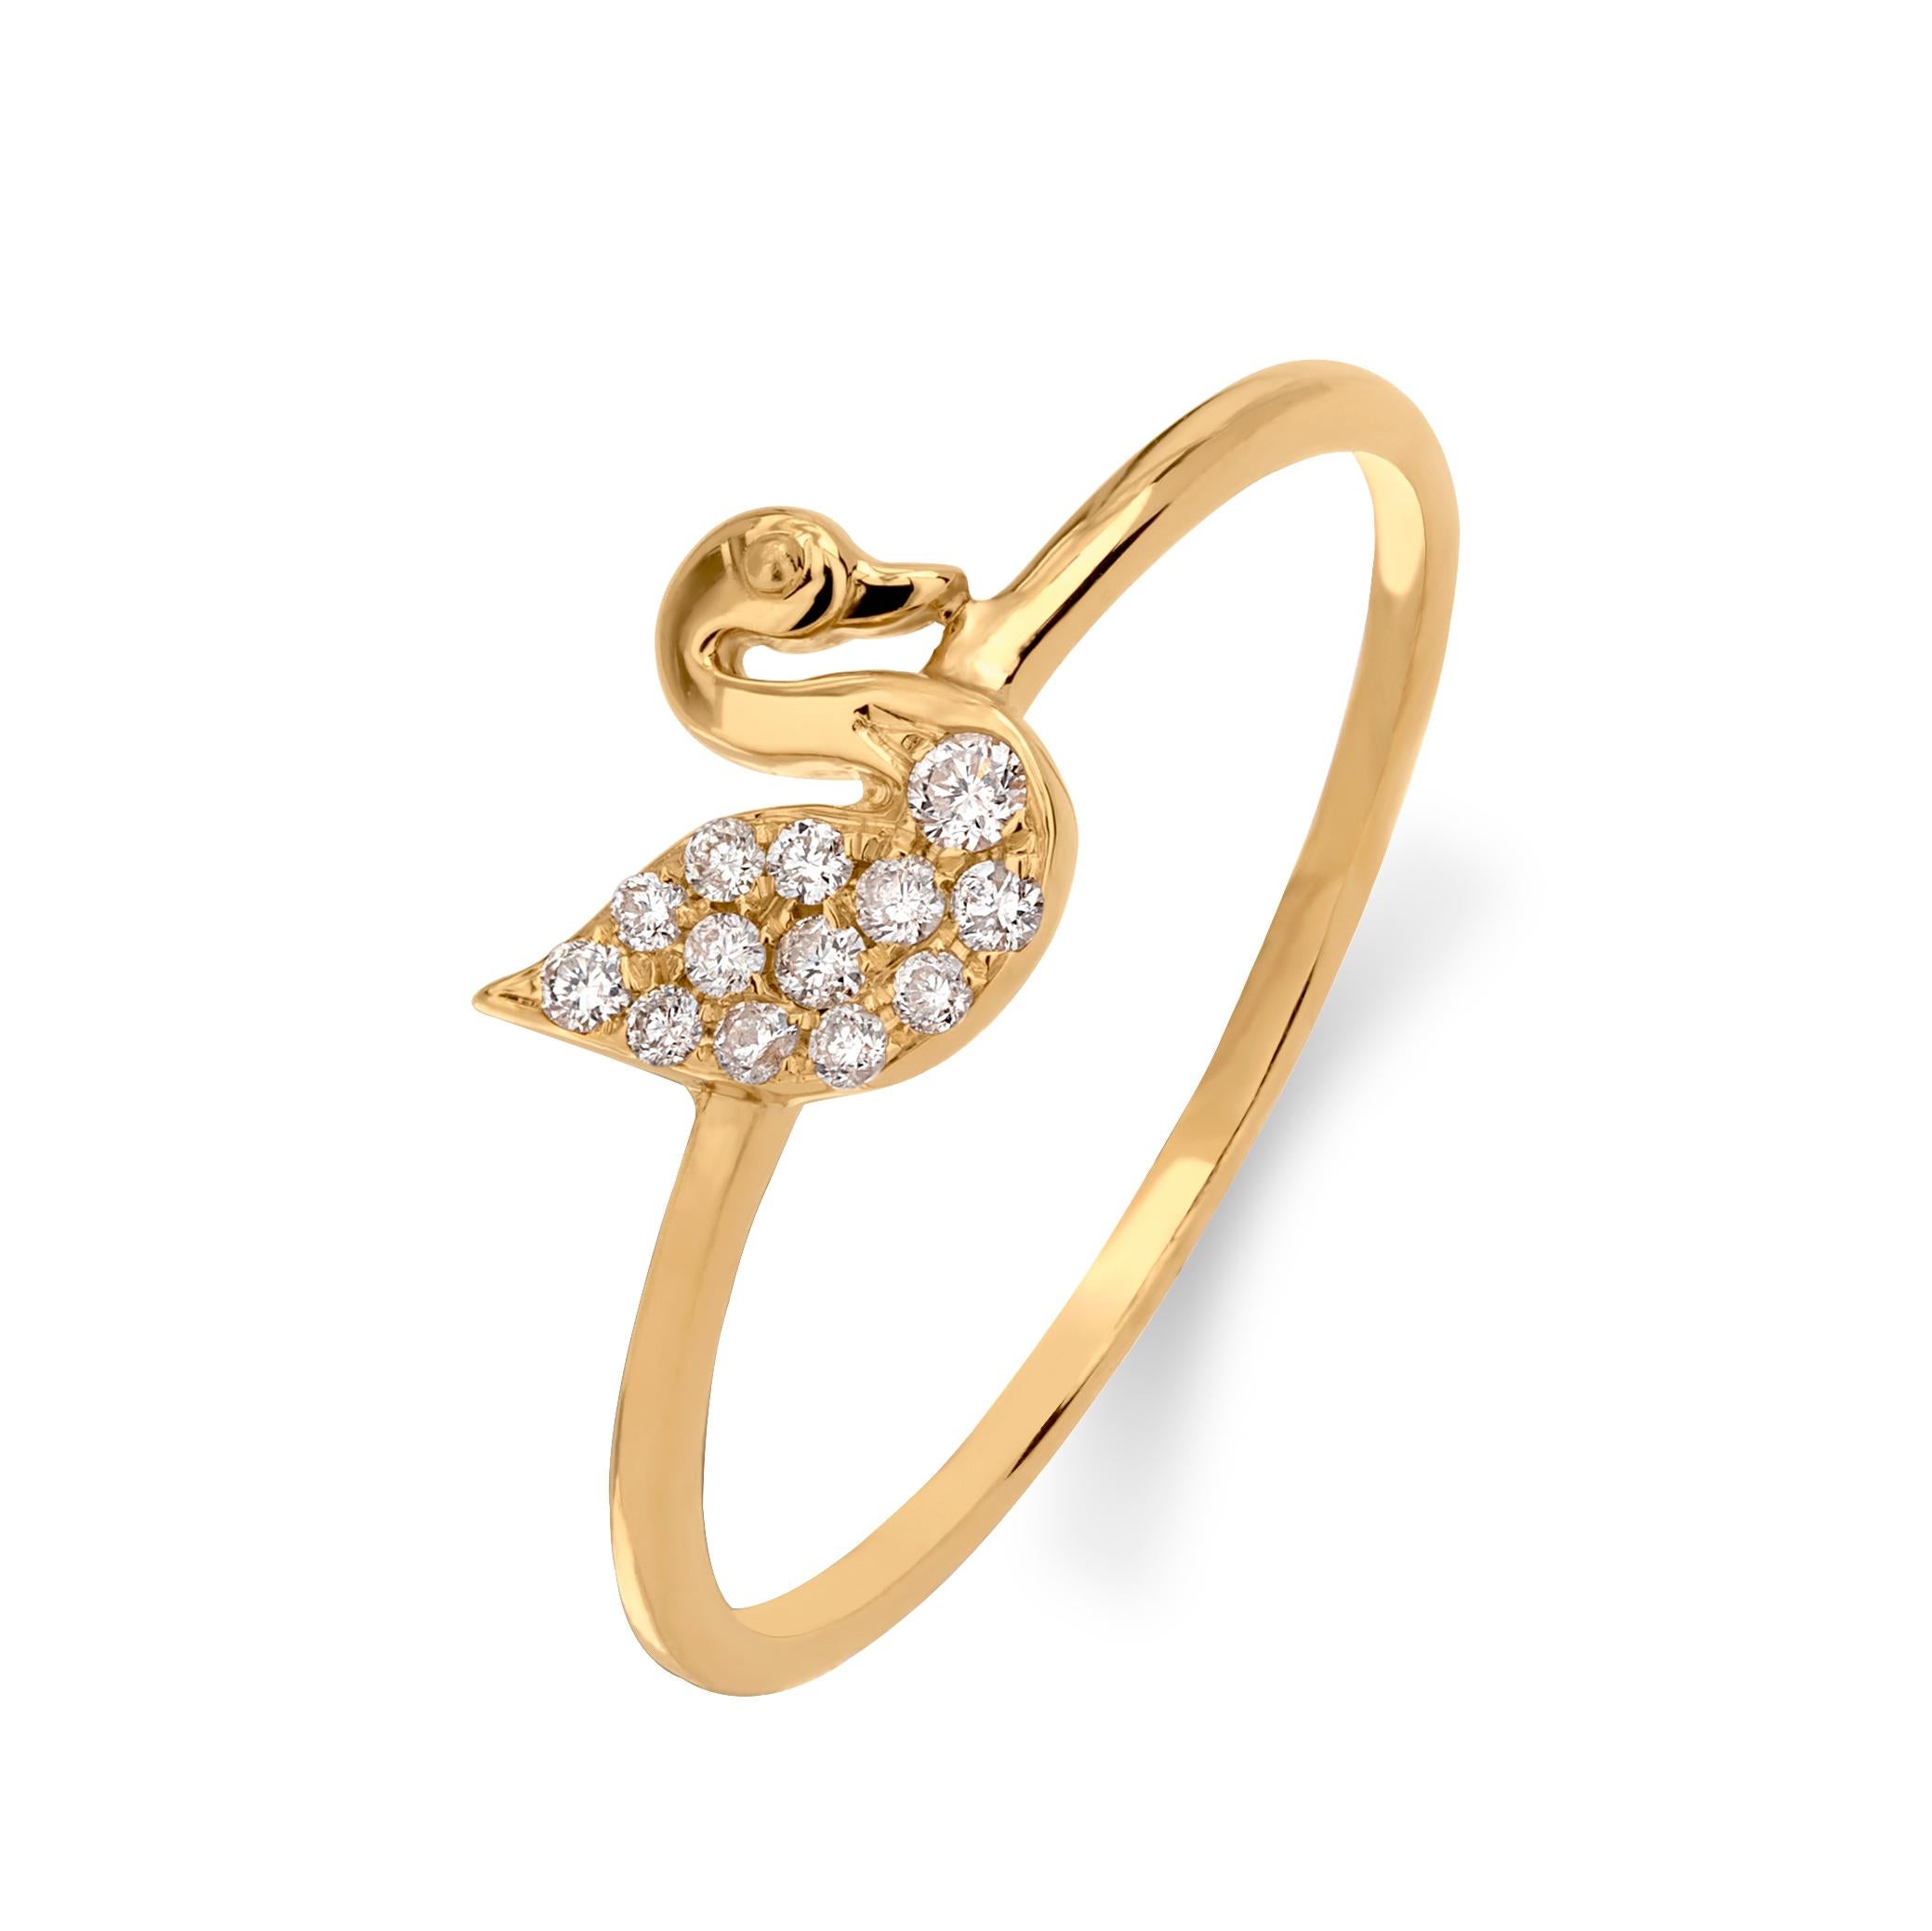 Contemporary Luxle Swan Diamond Ring in 18K Yellow Gold